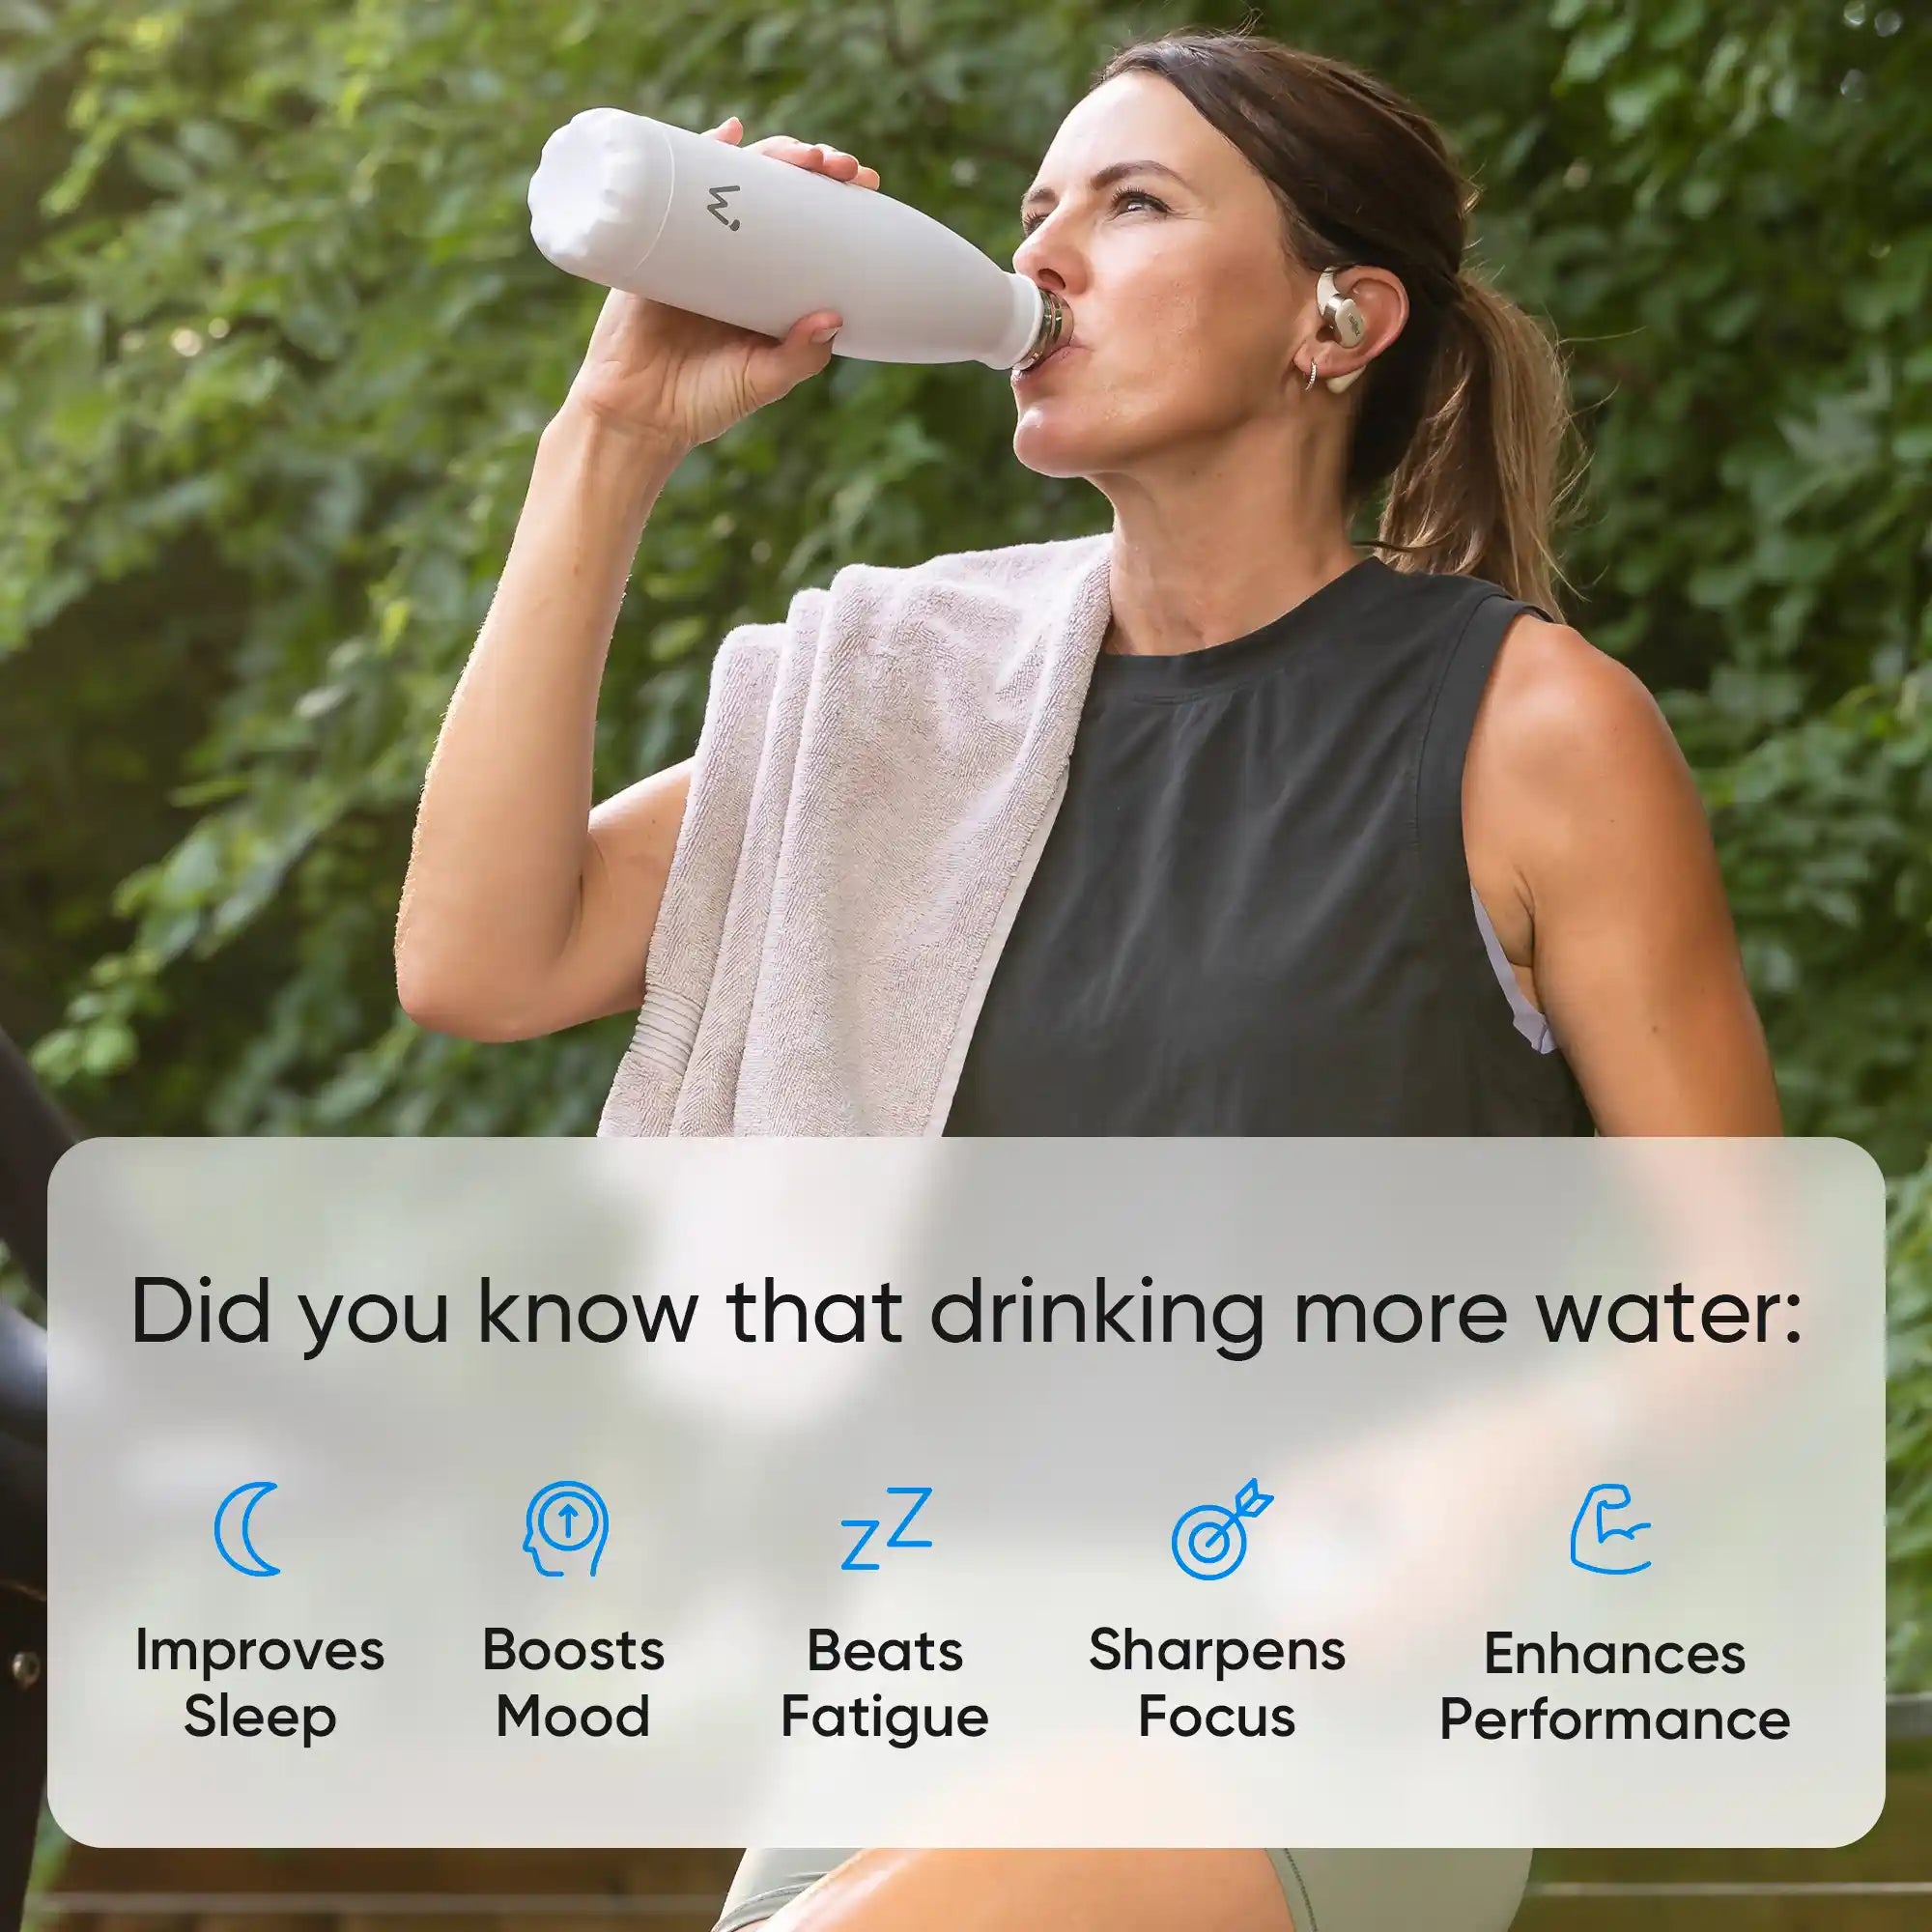 Did you know that drinking more water can improve sleep, boost mood, beat fatigue, sharpen focus, and enhance performance